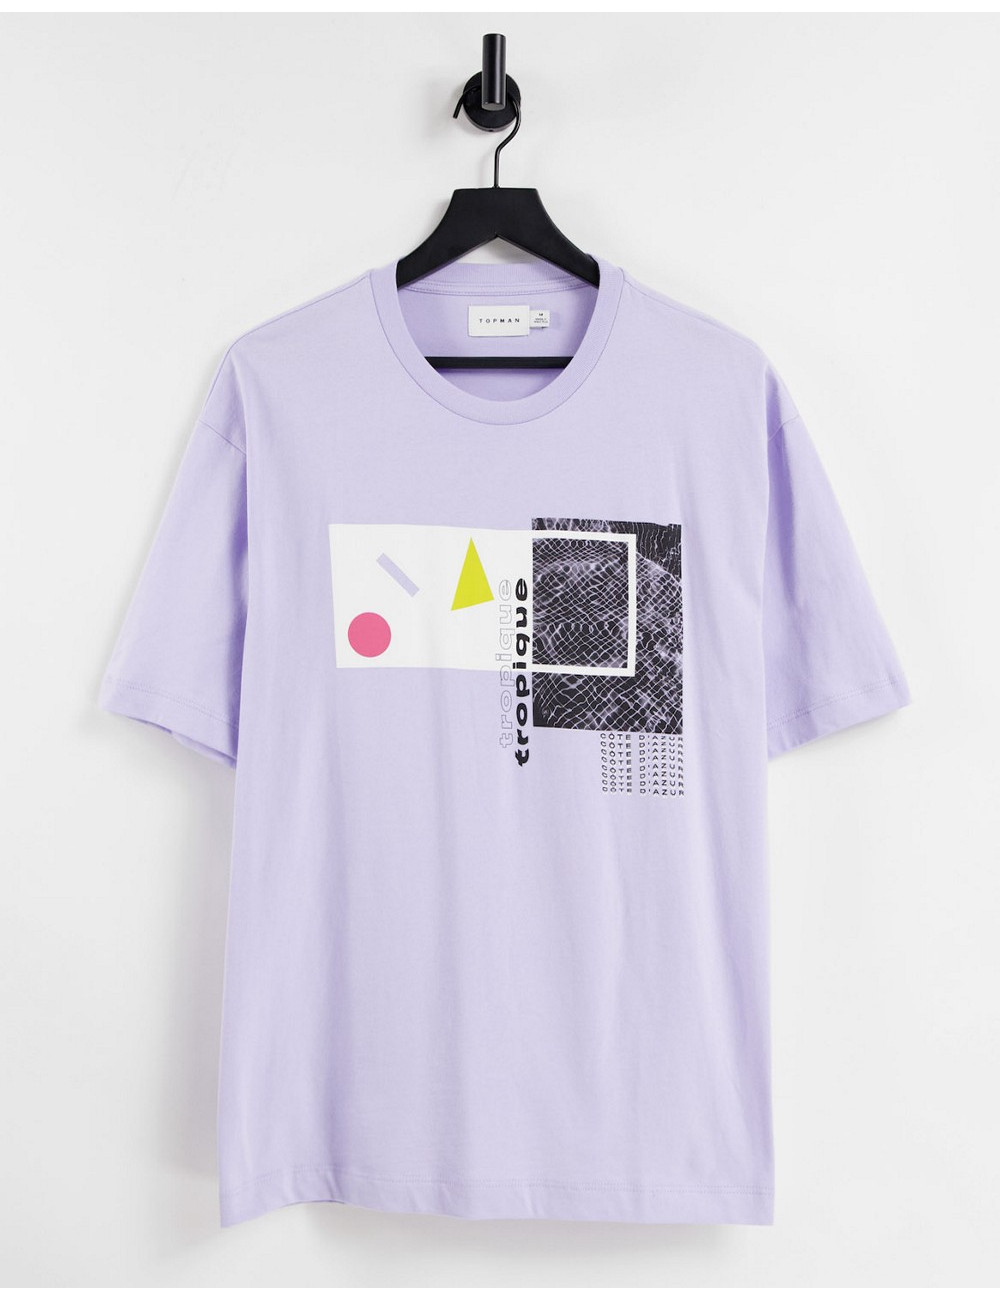 Topman t-shirt with collage...